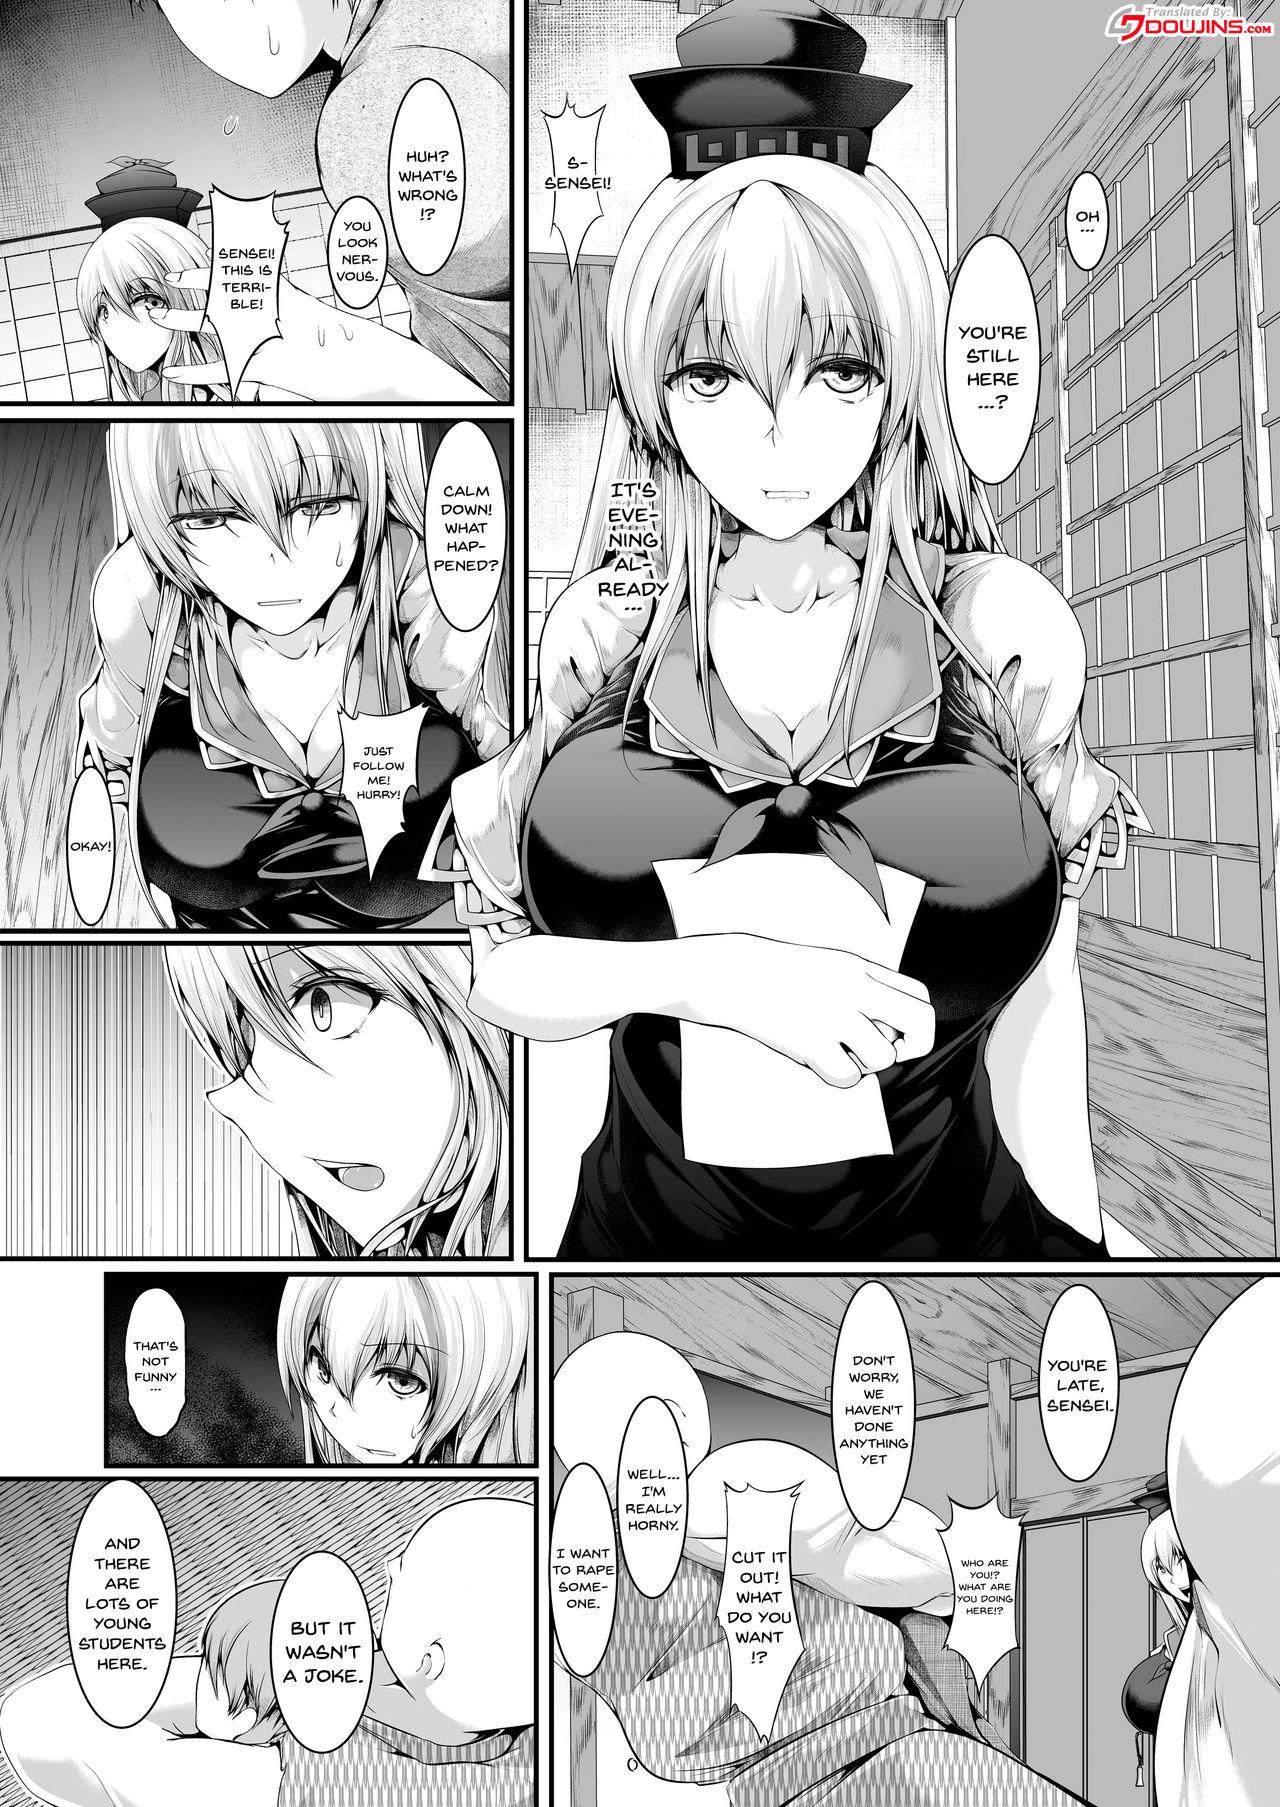 Couple Sex Terakoya Strip - Touhou project Lolicon - Page 2